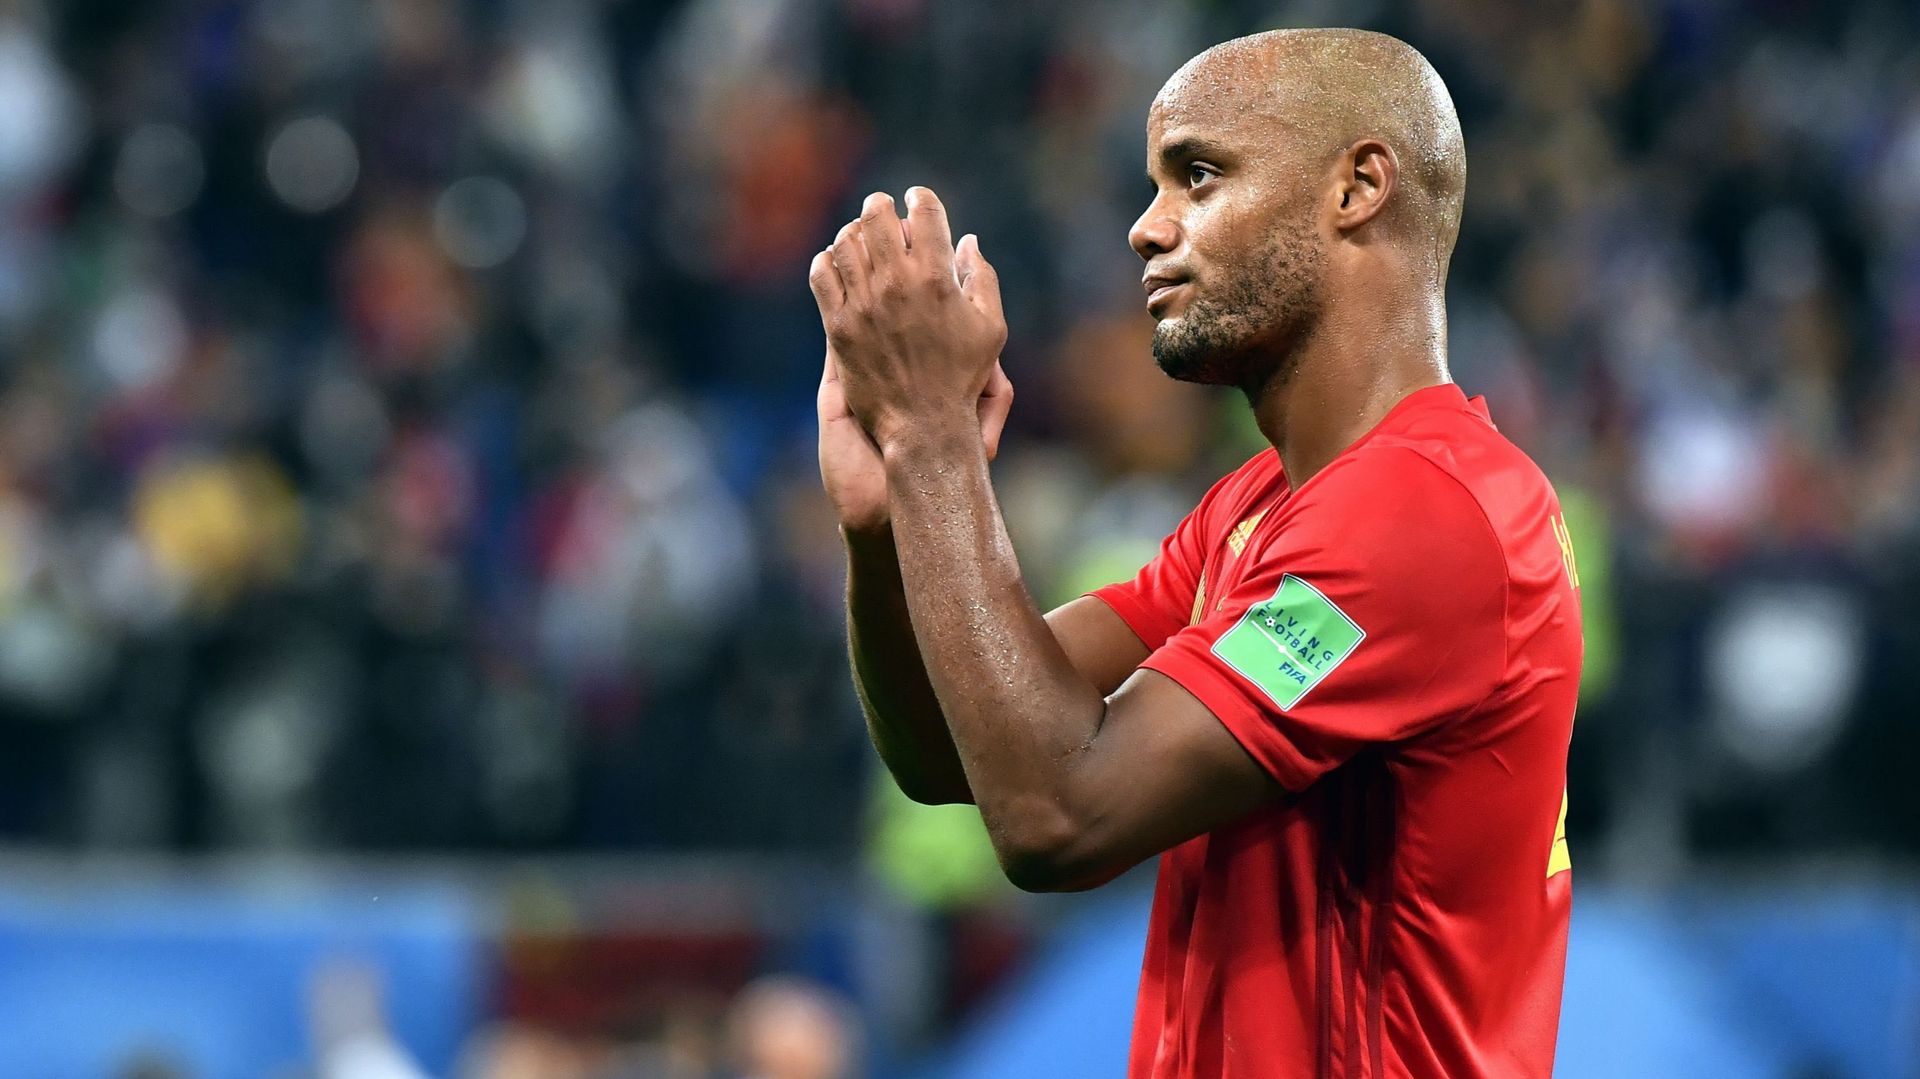 Vincent Kompany shows deception after they lost the semi final match between the French national soccer team